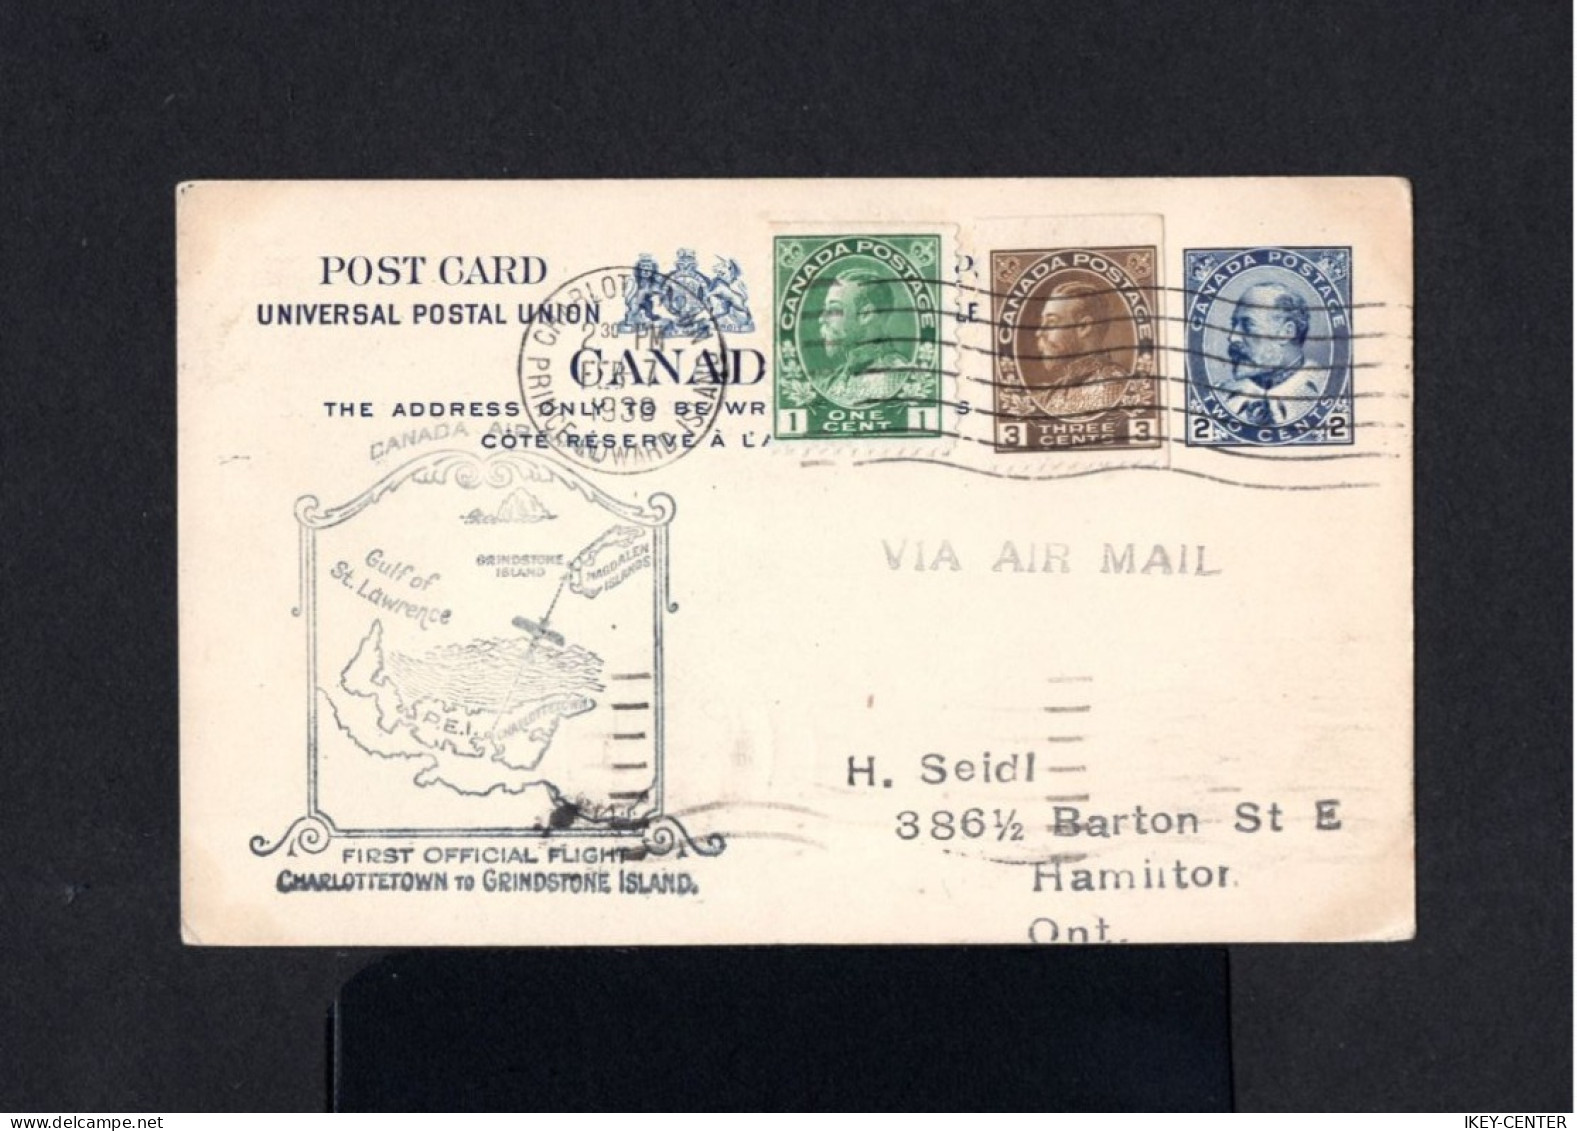 10293-CANADA-AIRMAIL POSTCARD CHARLOTTETOWN To HAMILTON (ontario)1933.WWII.CARTE POSTALE.POSTKARTE.First Official Flight - Covers & Documents